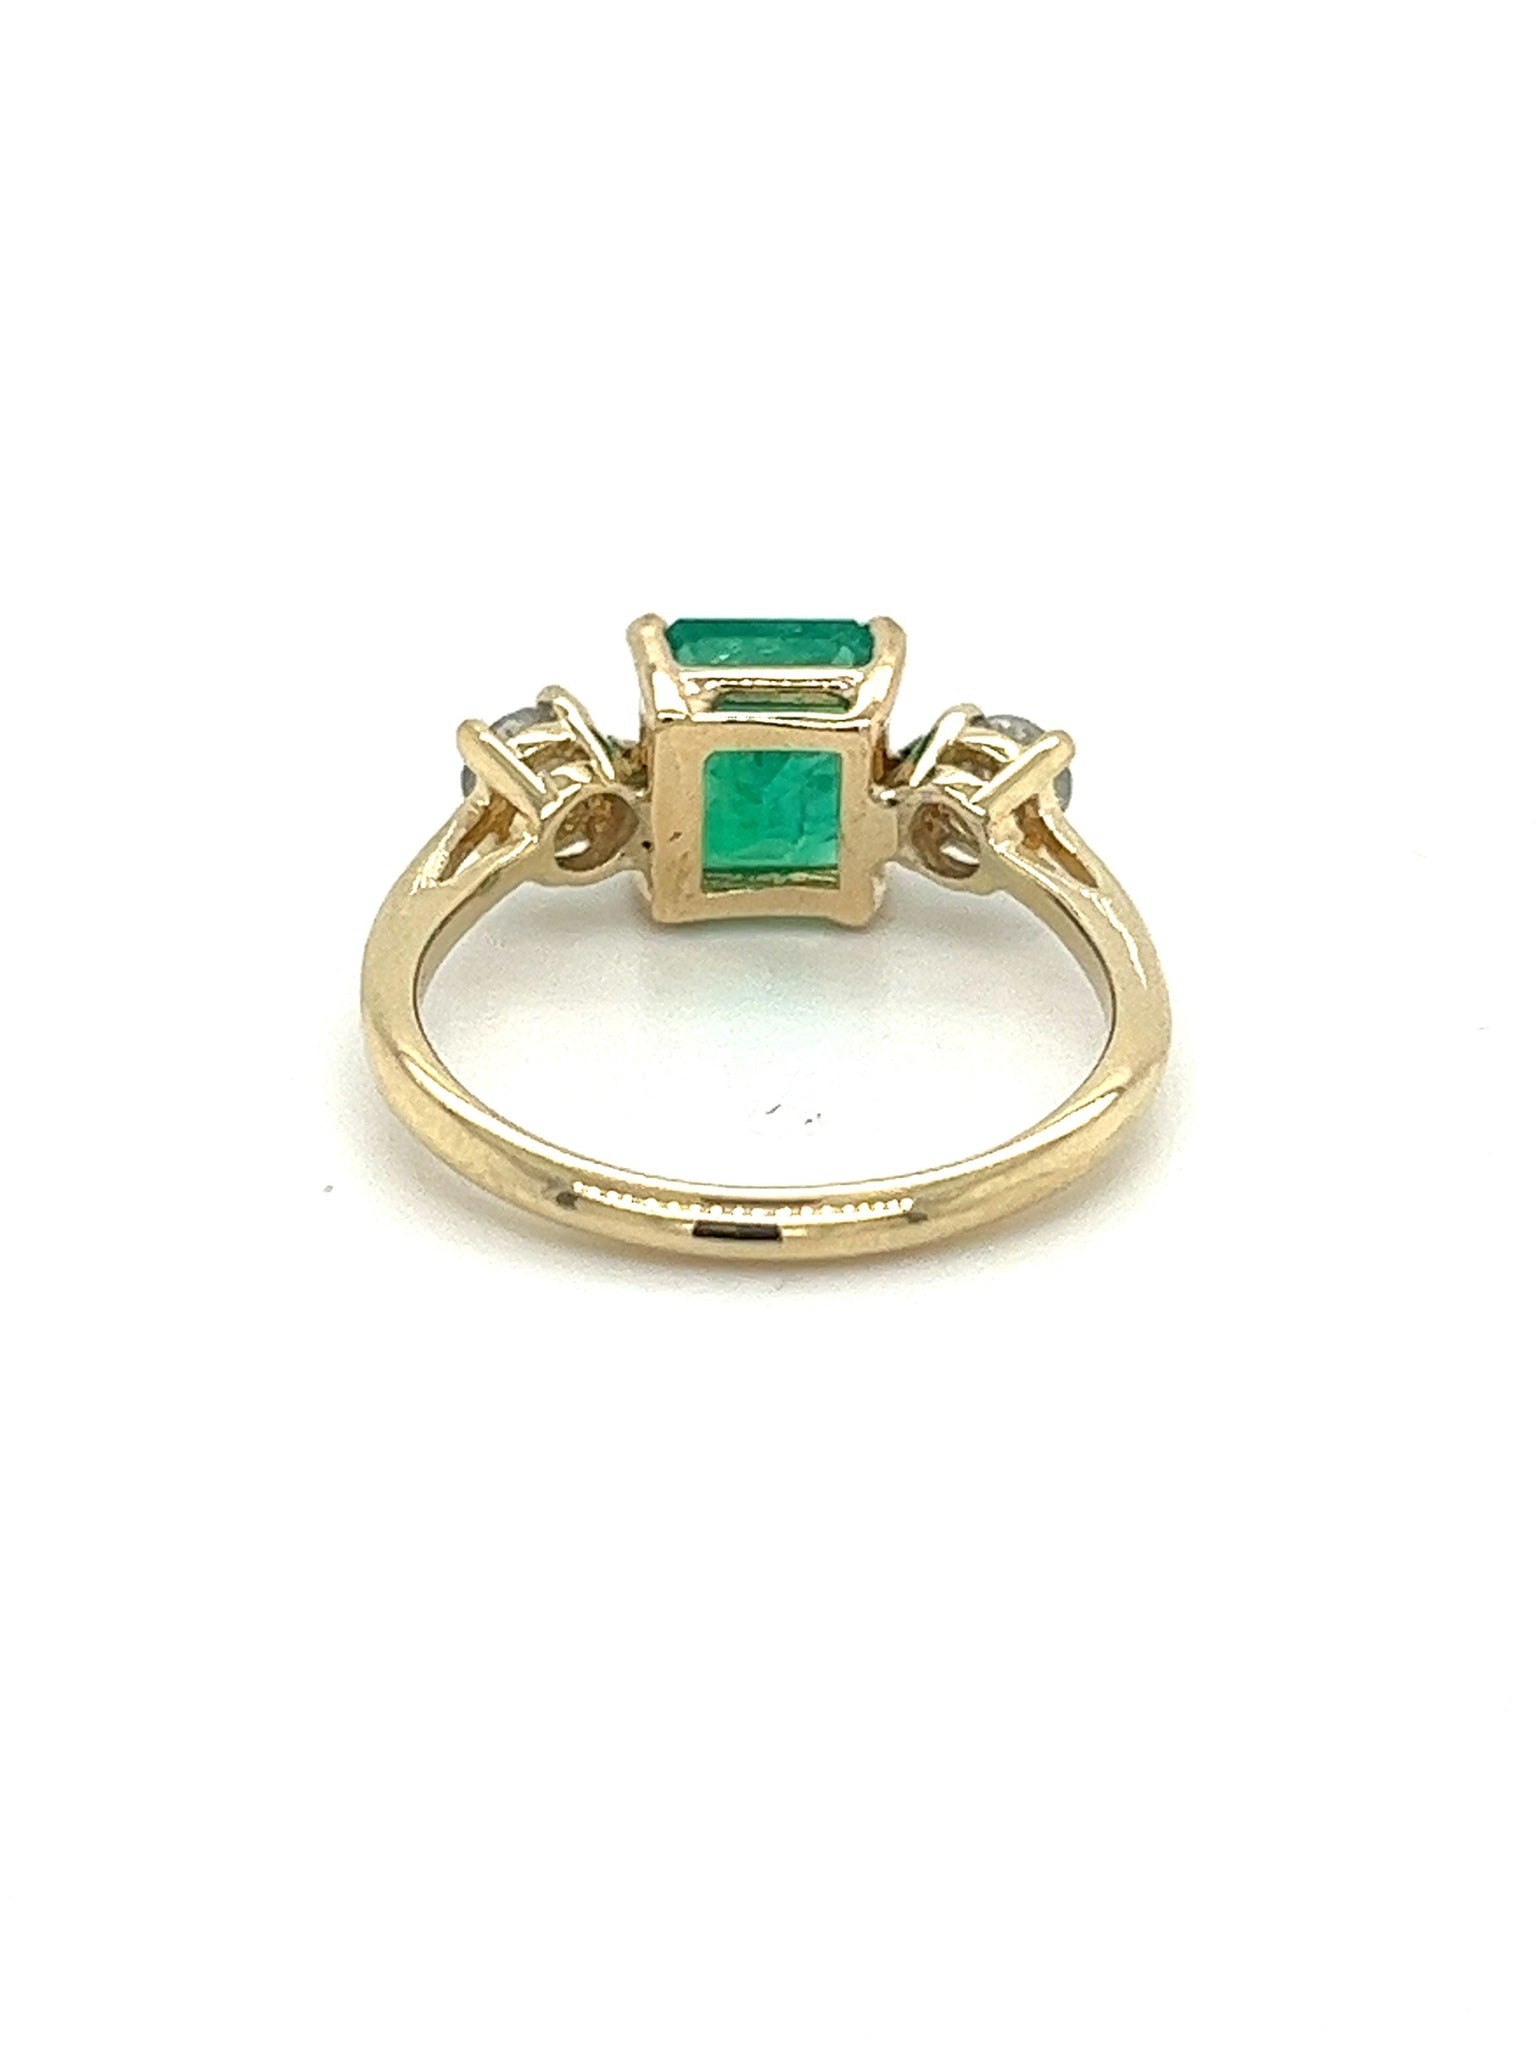 Natural 2.05 Carat Colombian Emerald and Diamond Three-Stone Thin Band Ring in 14K Yellow Gold